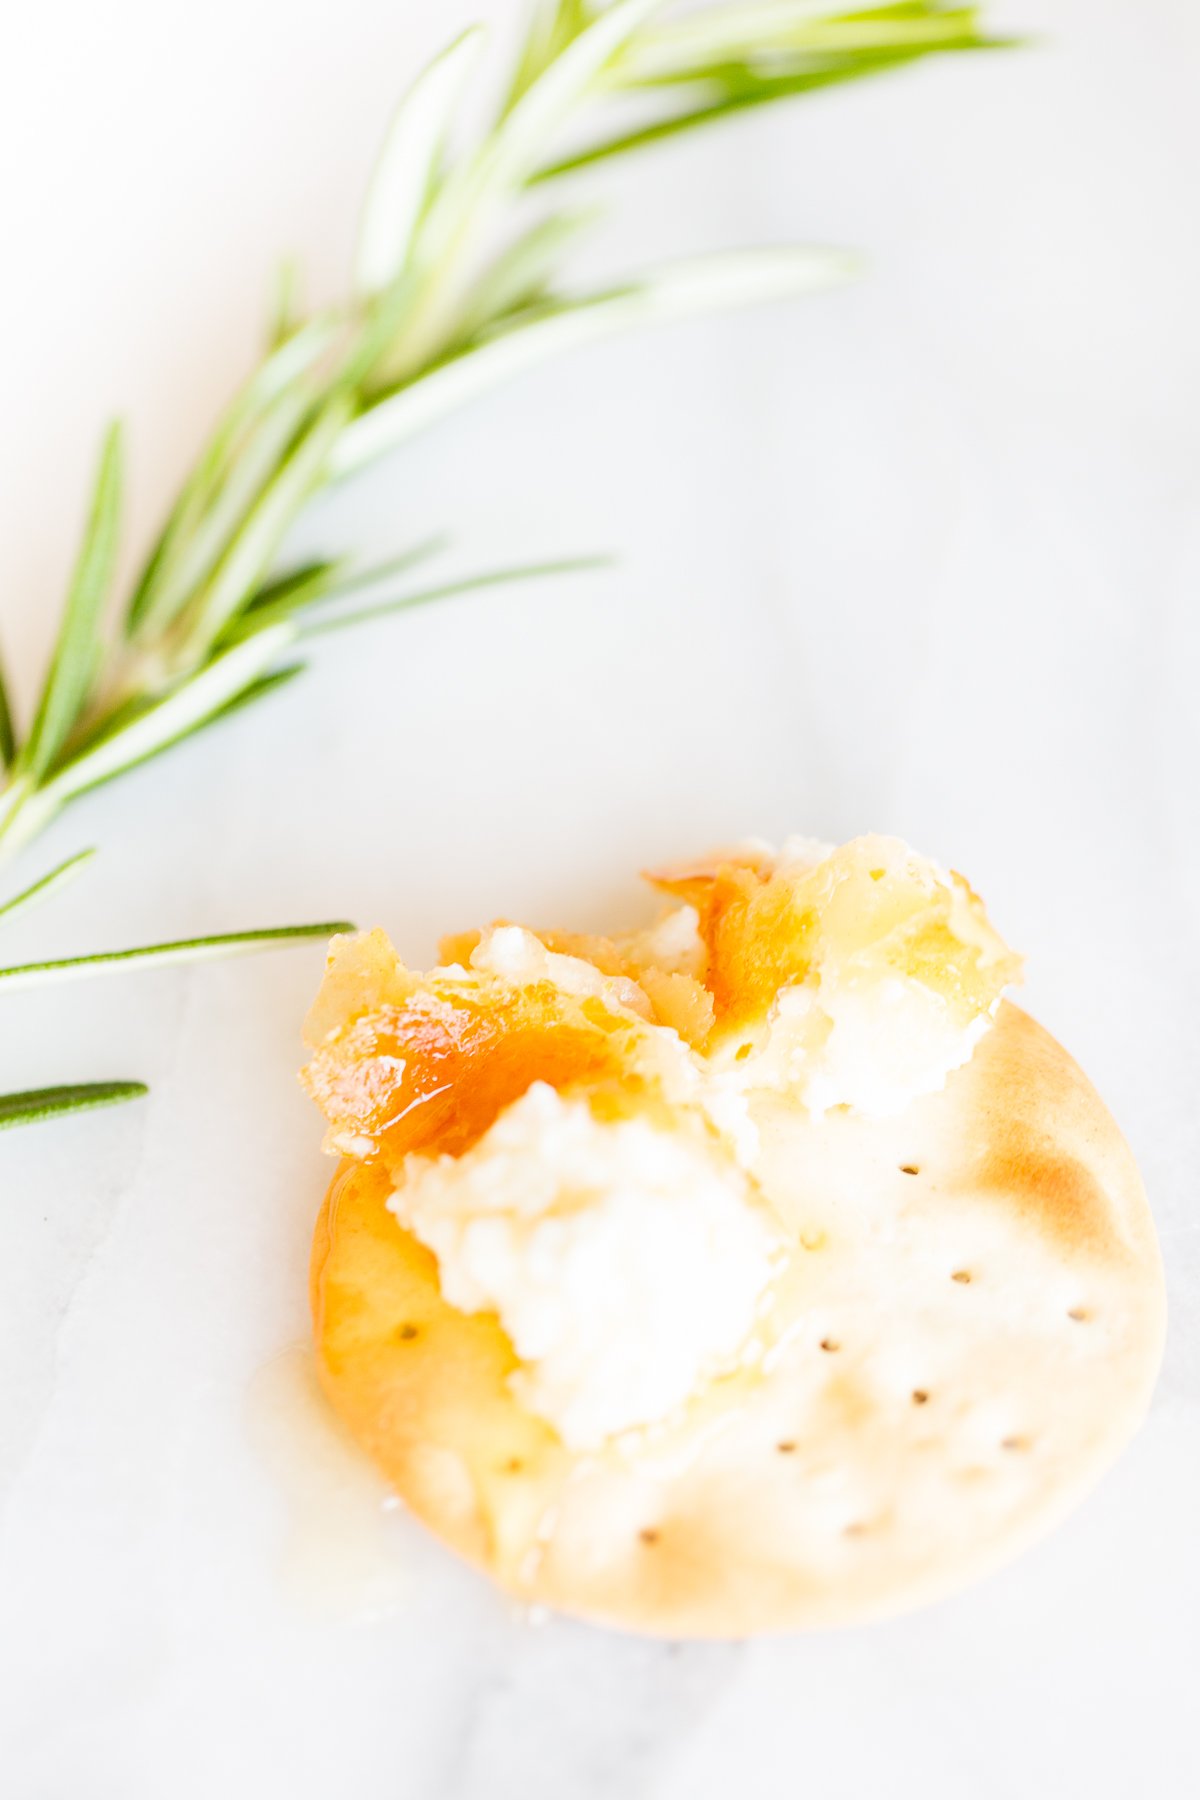 Goat cheese on a cracker with a stem of rosemary to the side